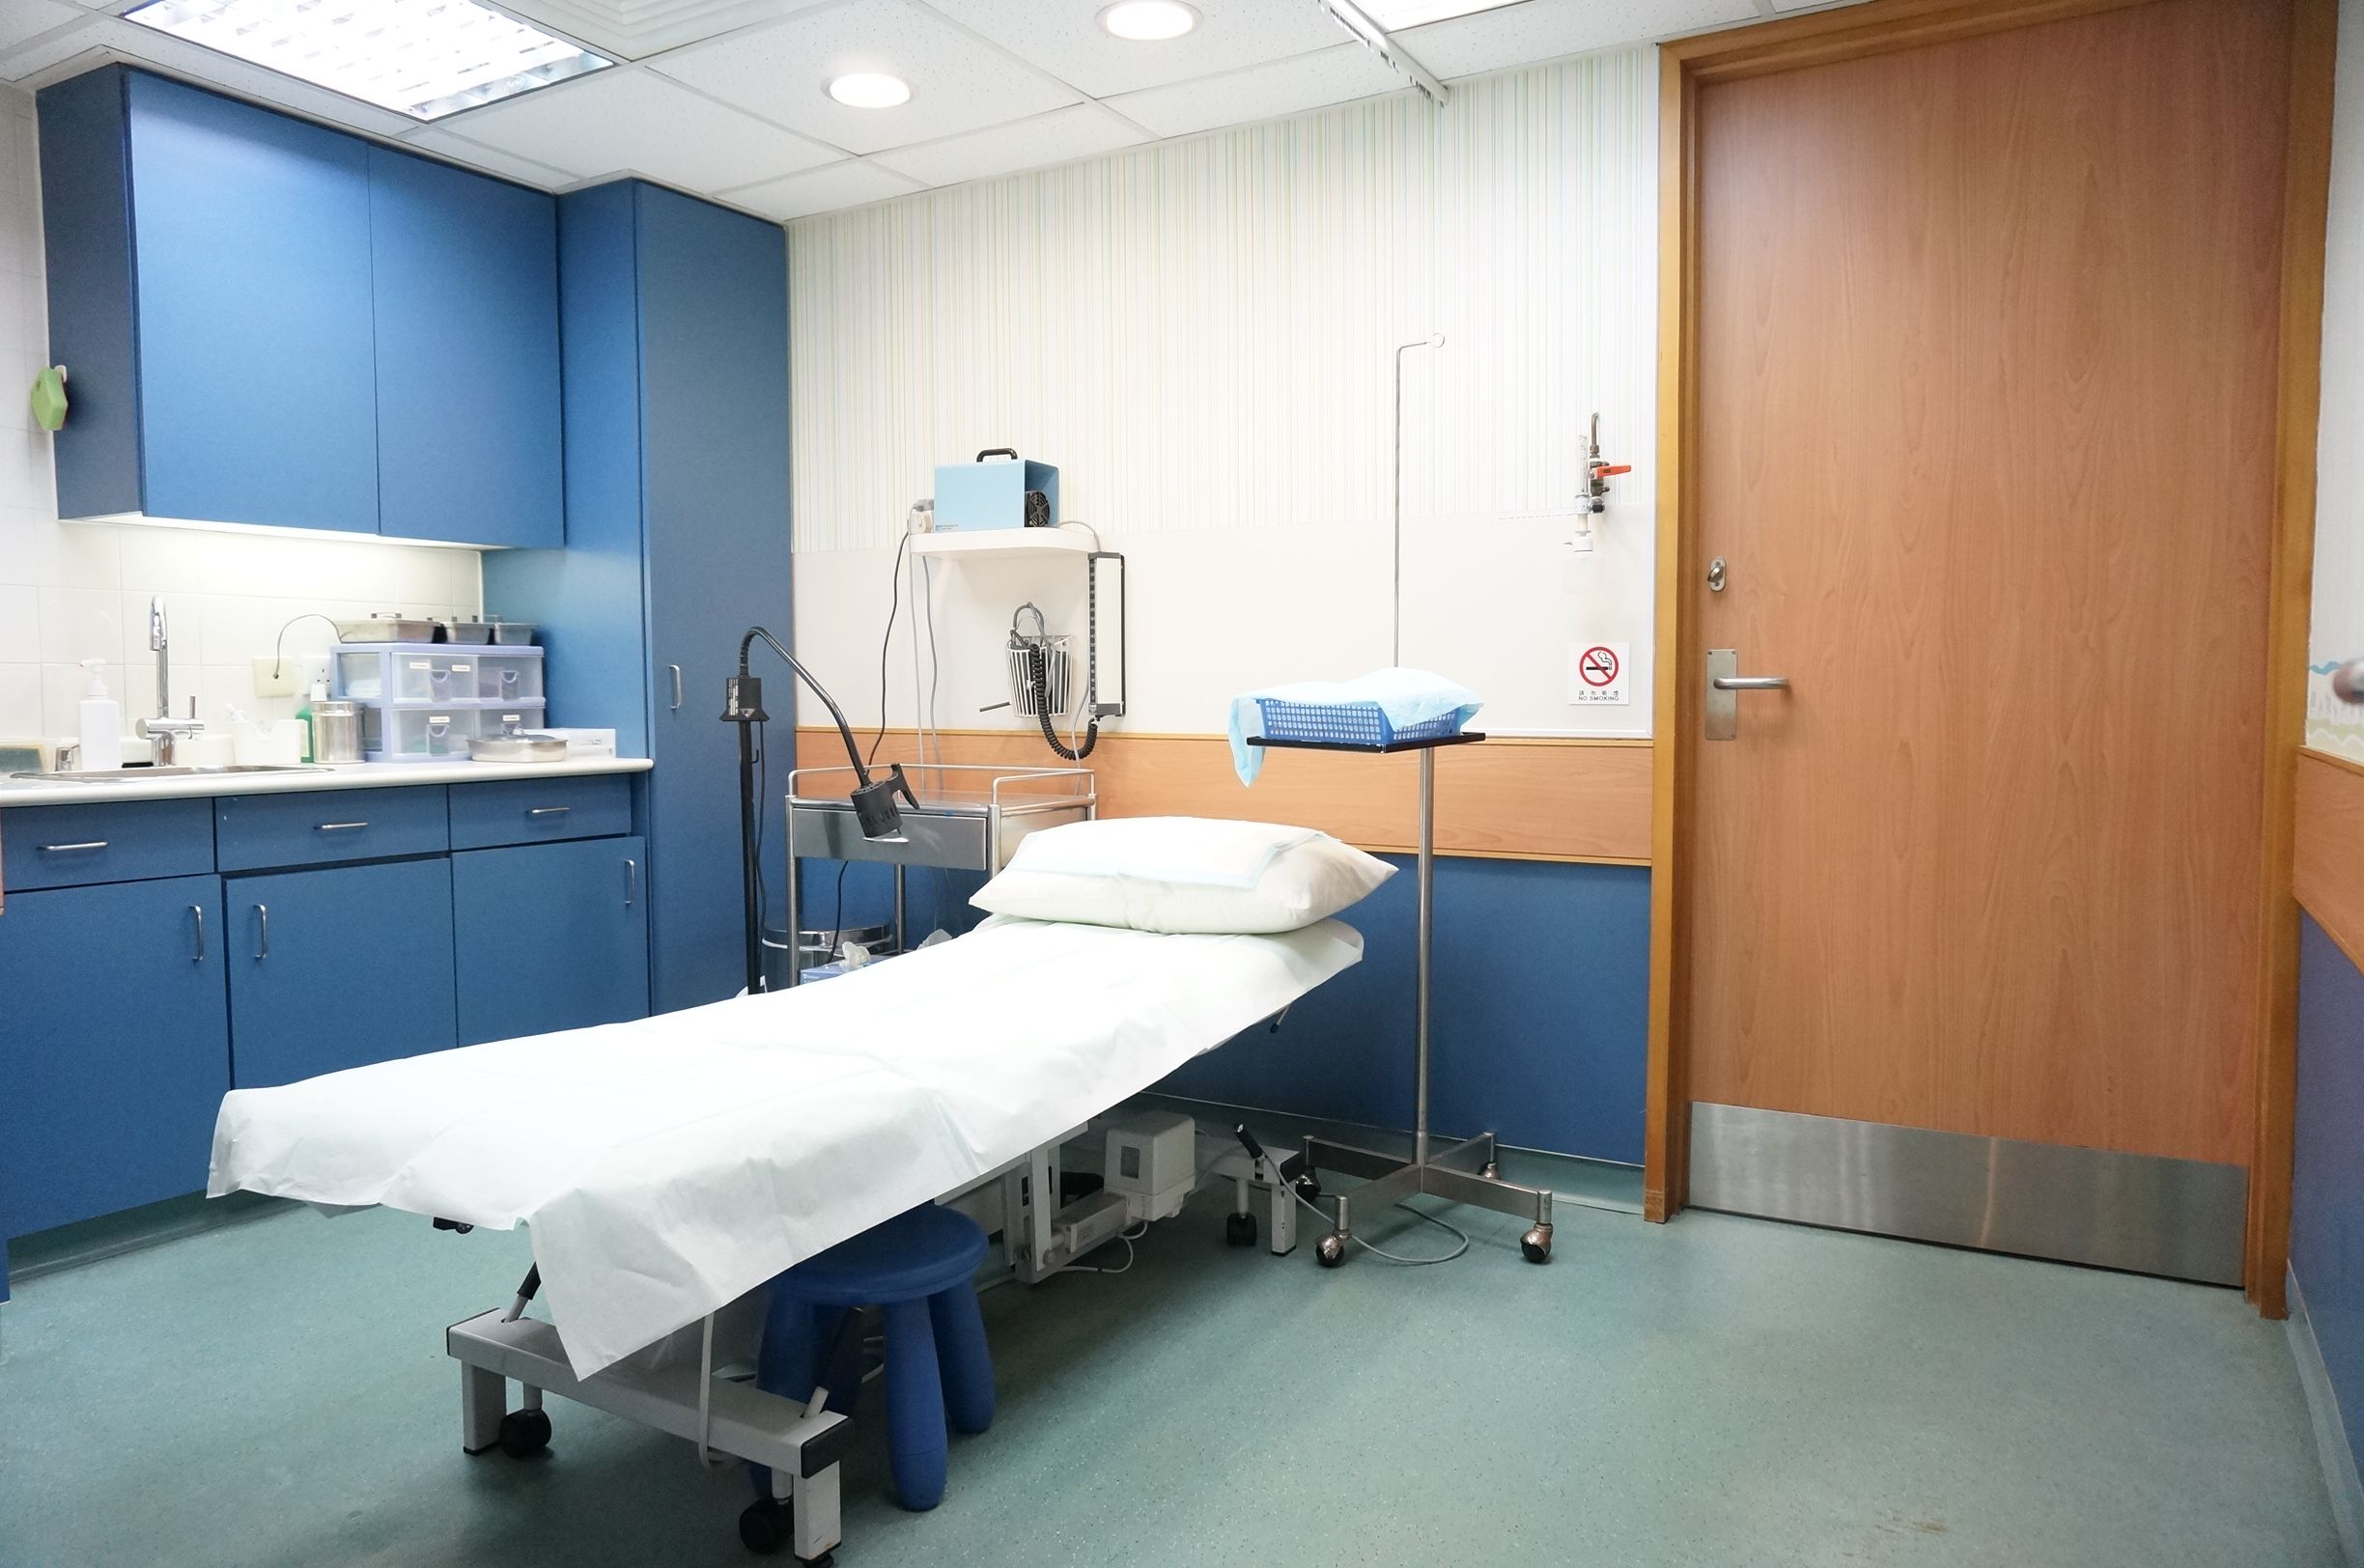 Examination room with patient bed and blue cabinets